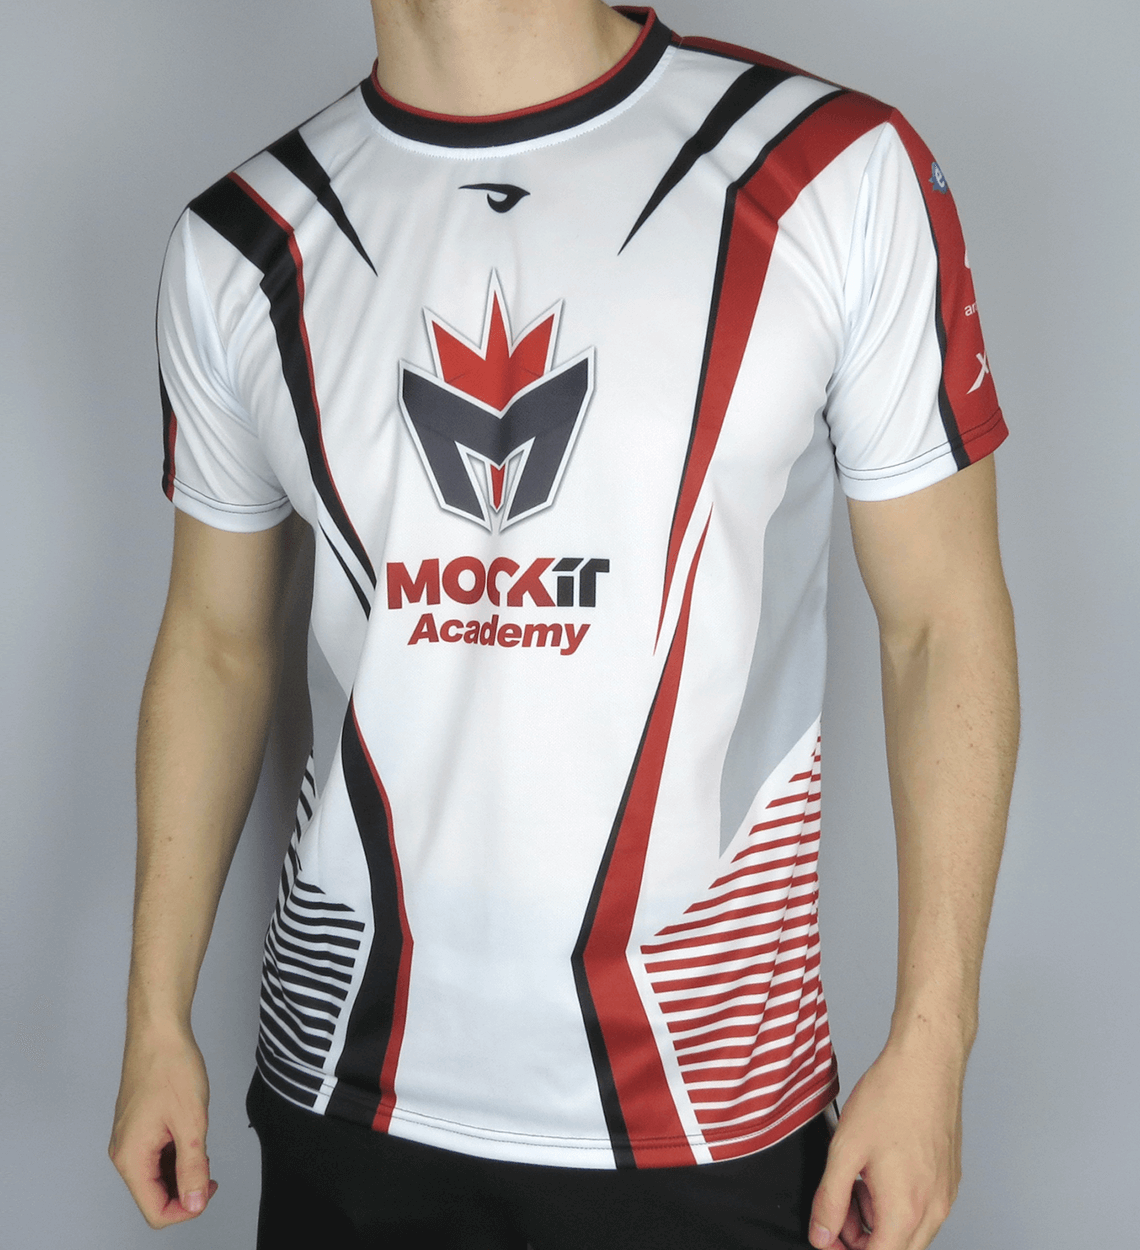 Download Mock-it Academy Jersey - Raven.GG | Esports Apparel Design & Production